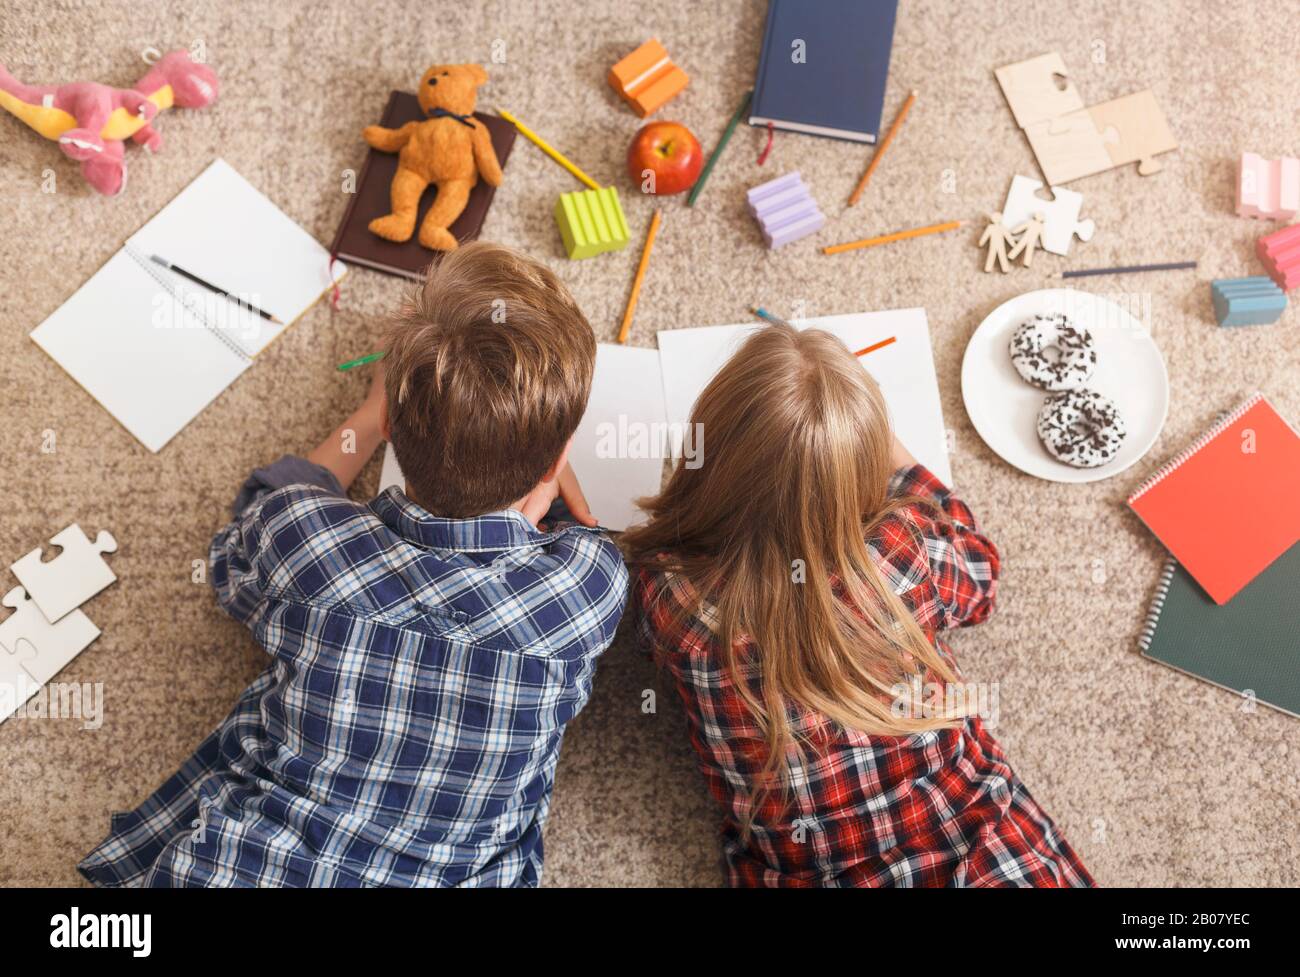 Unrecognizable Brother And Sister Drawing Together Lying On Floor Stock Photo